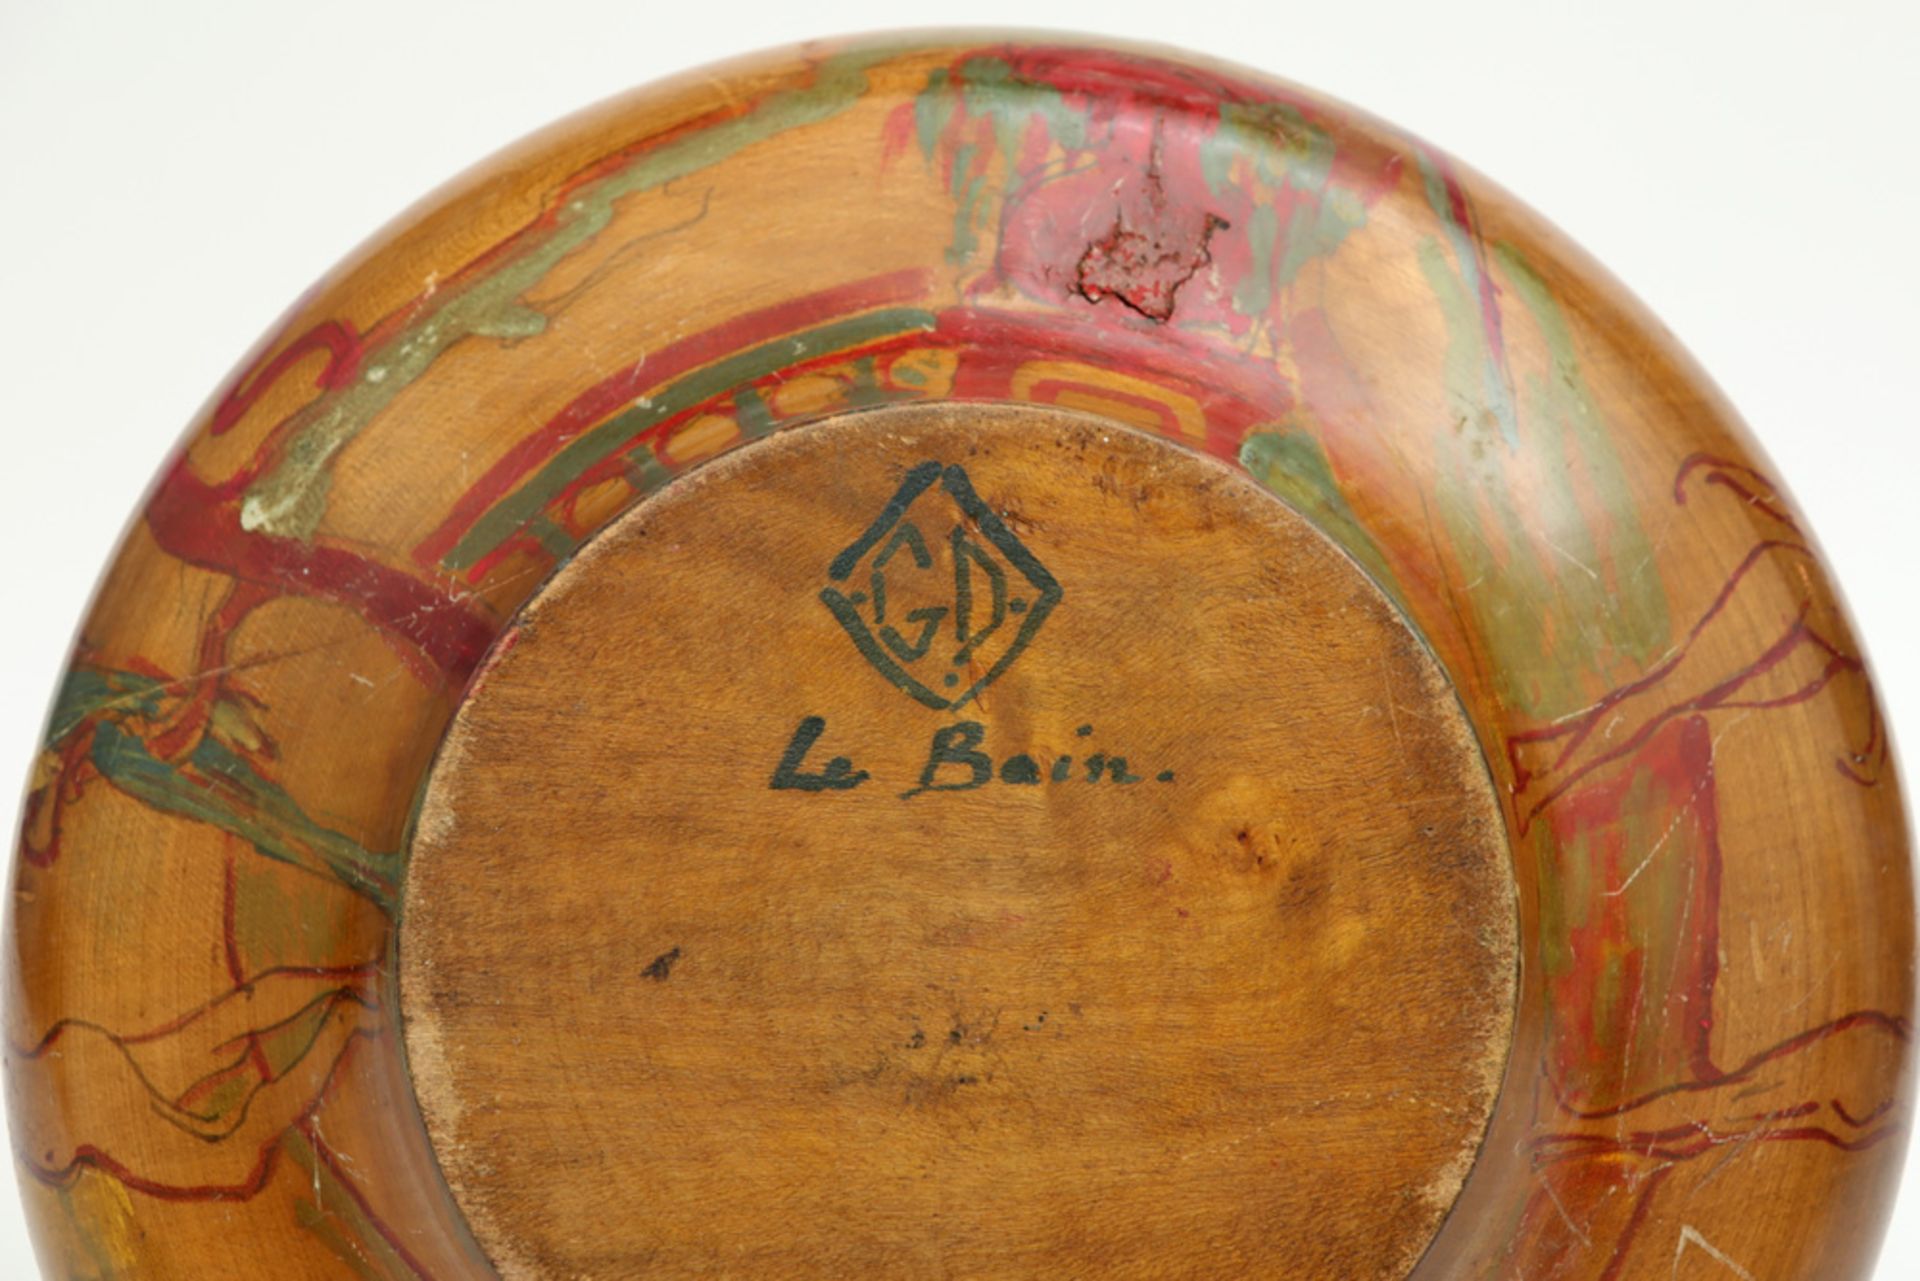 twenties' Art Deco bowl in wood with a painted decor - with "G D" monogram - Image 4 of 4